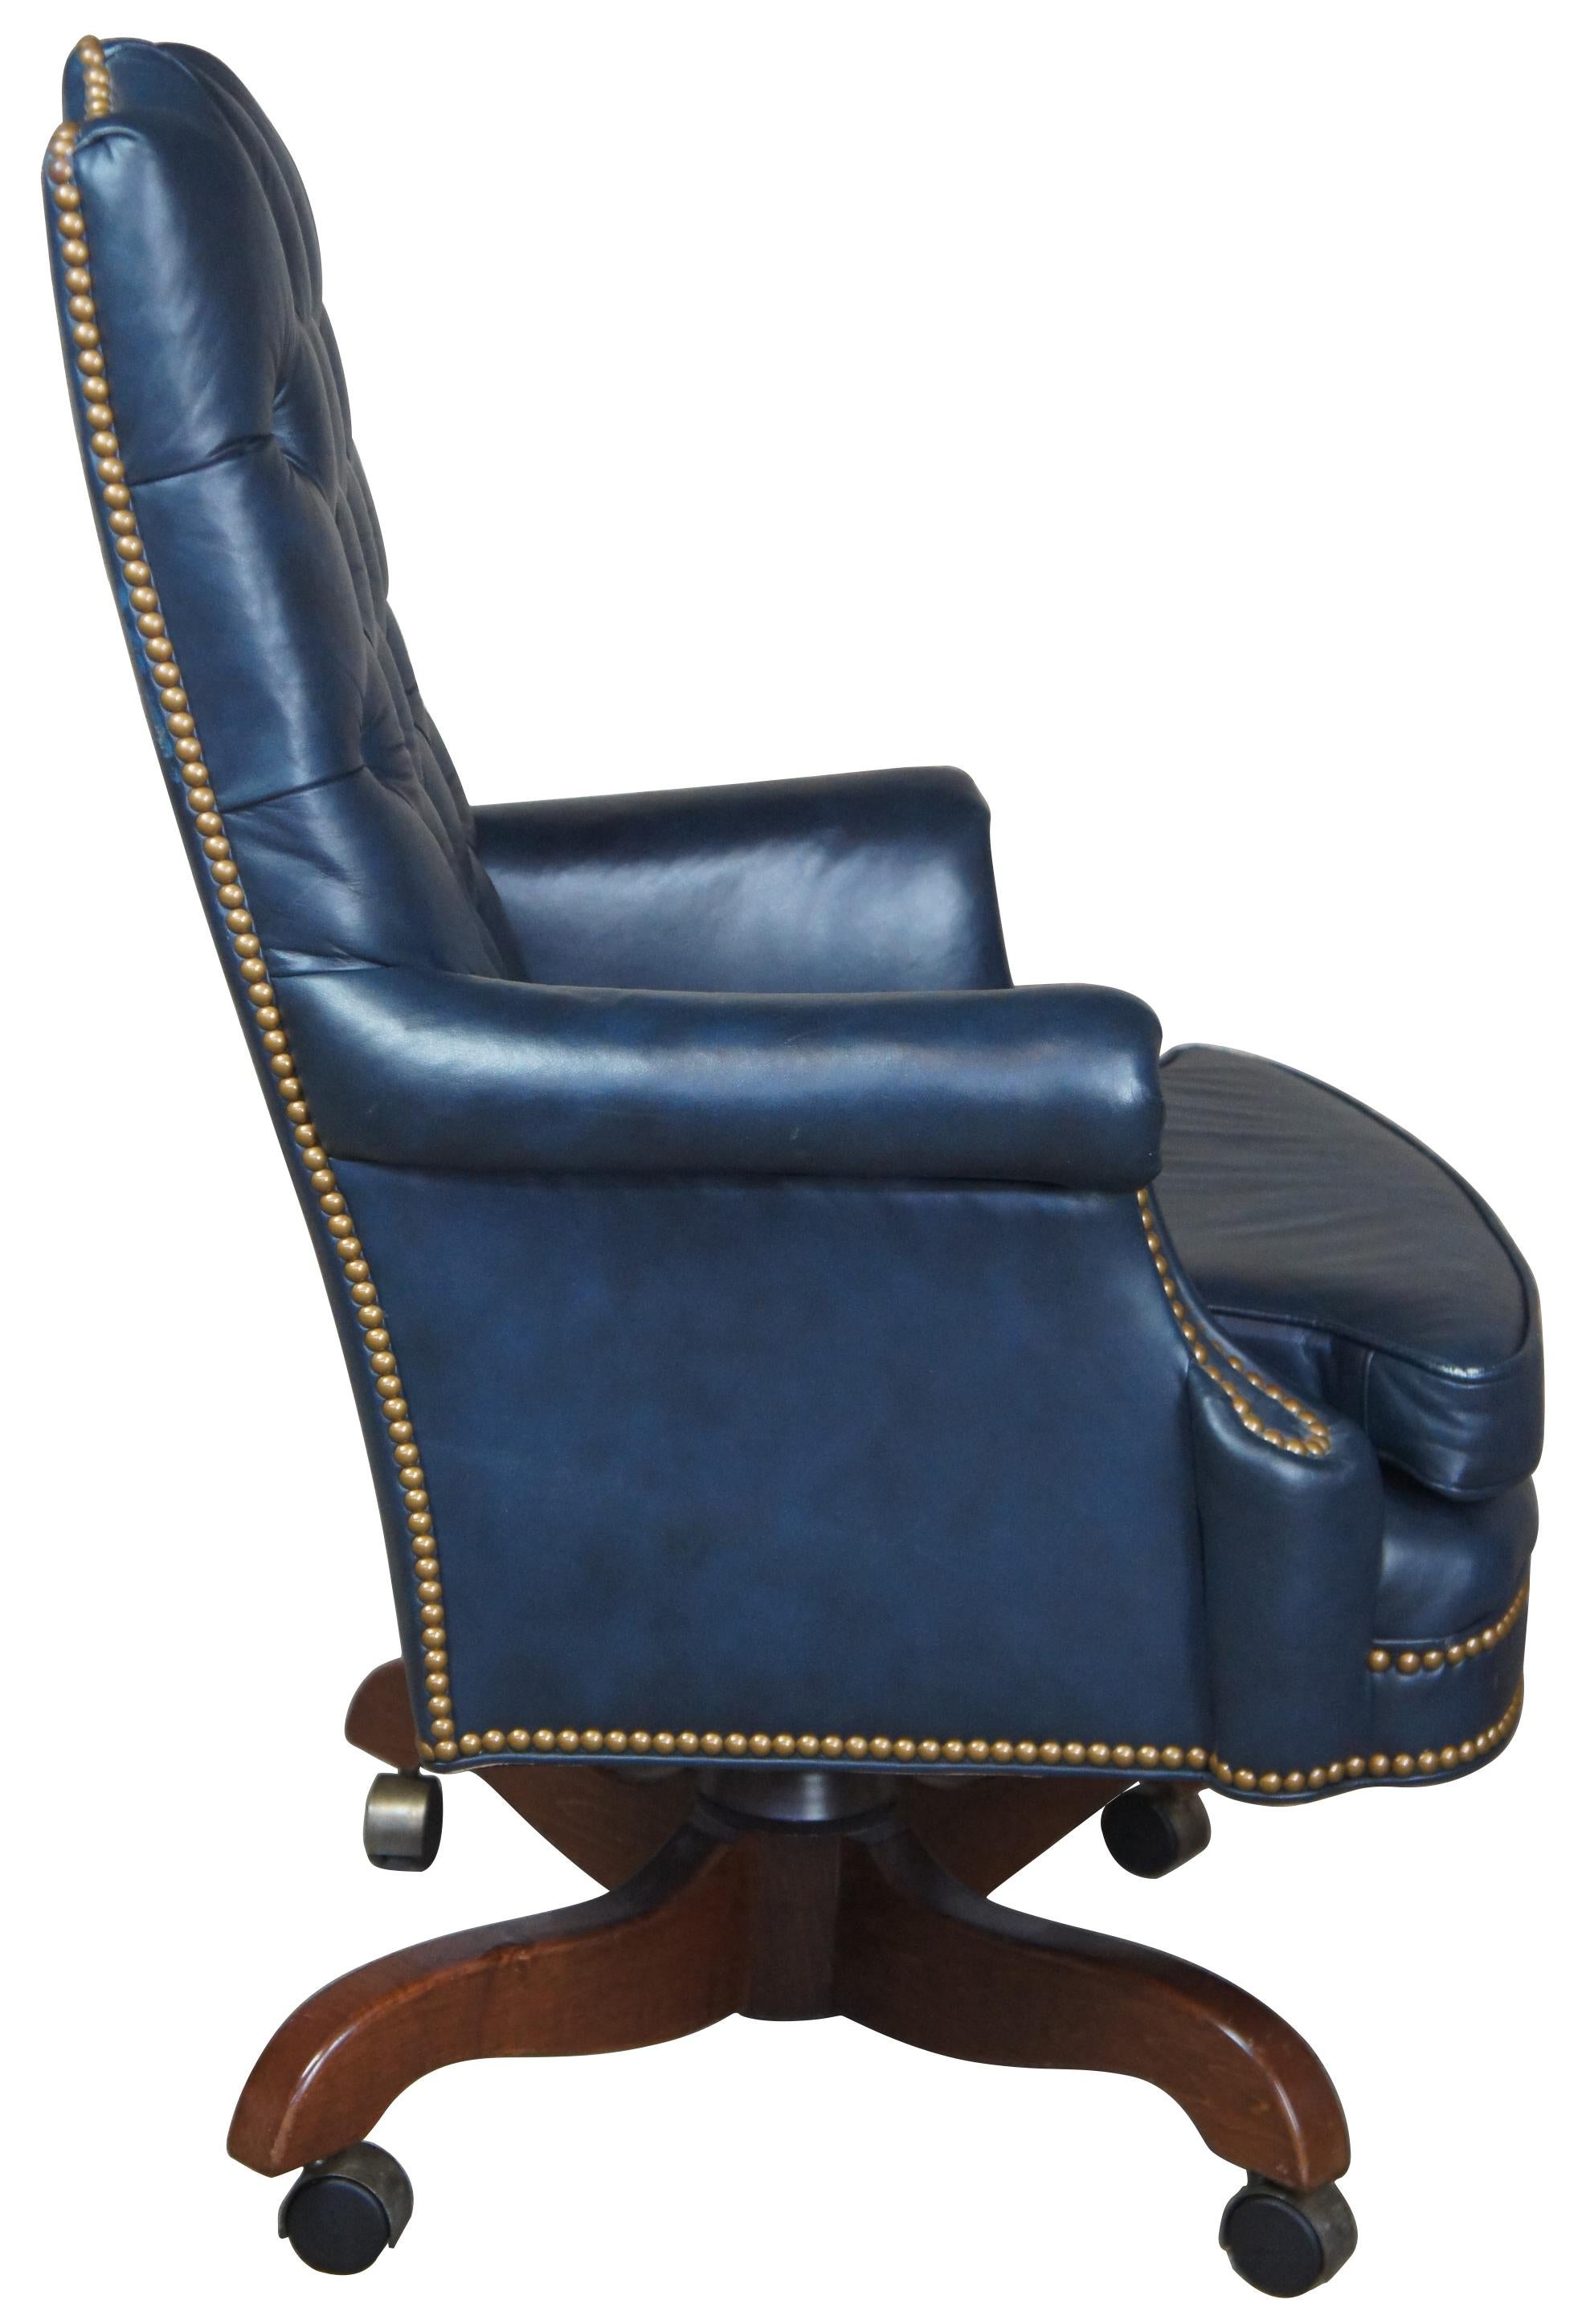 north hickory furniture company leather chair